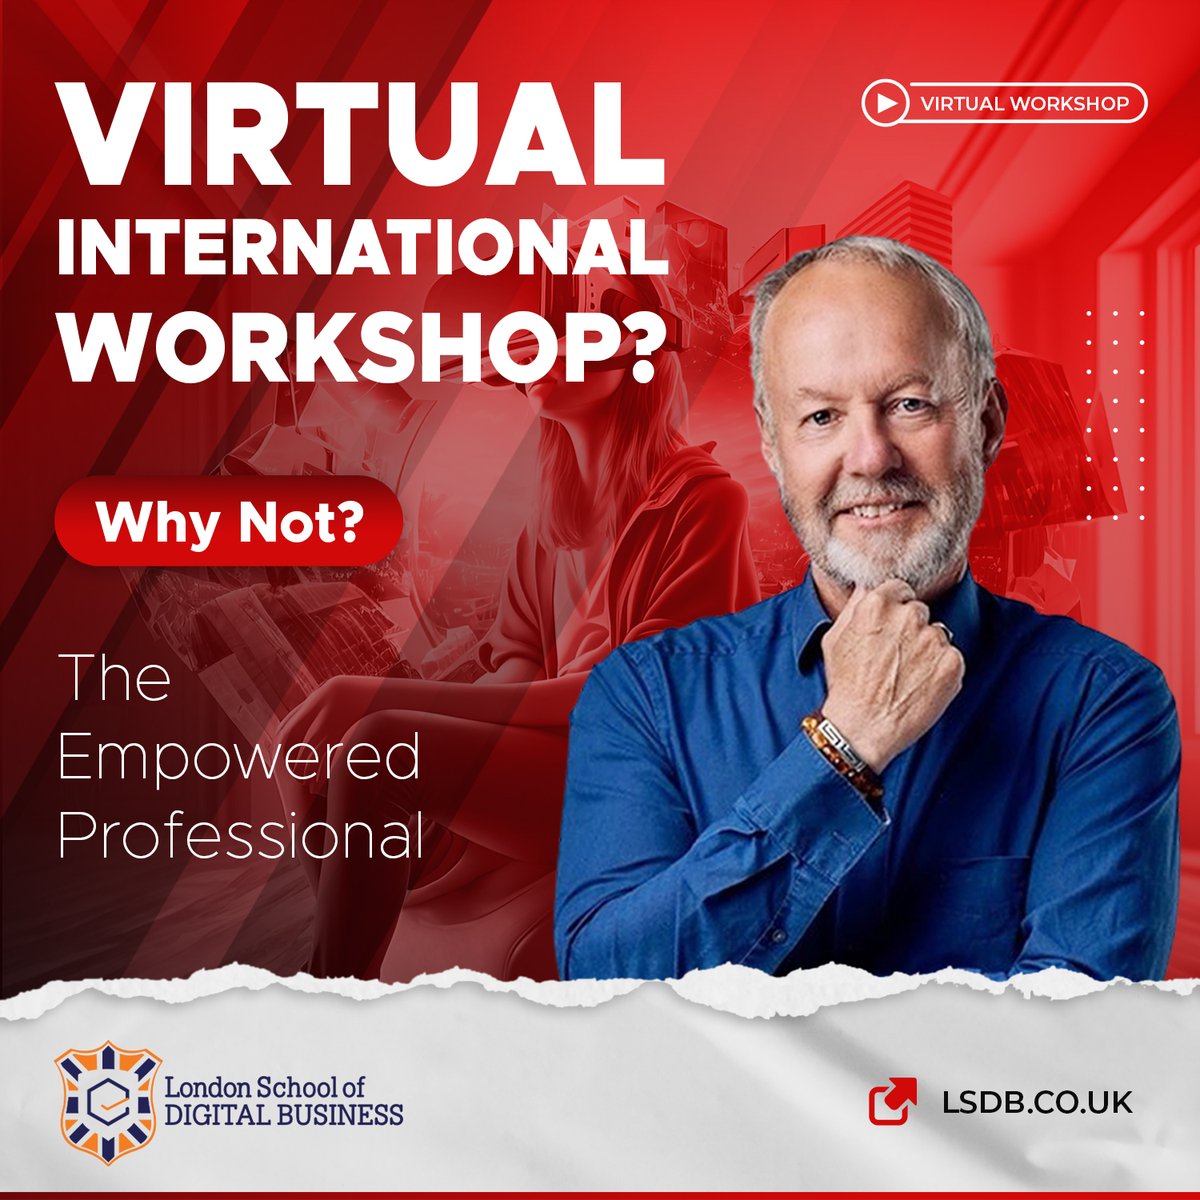 A rare opportunity for all aspiring students and professionals. Attend the 3-day international workshop by the very insightful Graham Scott.

To register visit lsdb.co.uk/events/registr…

#EmpoweredProfessional #ProfessionalDevelopment #OnlineWorkshop #CareerGrowth #LSDBUK